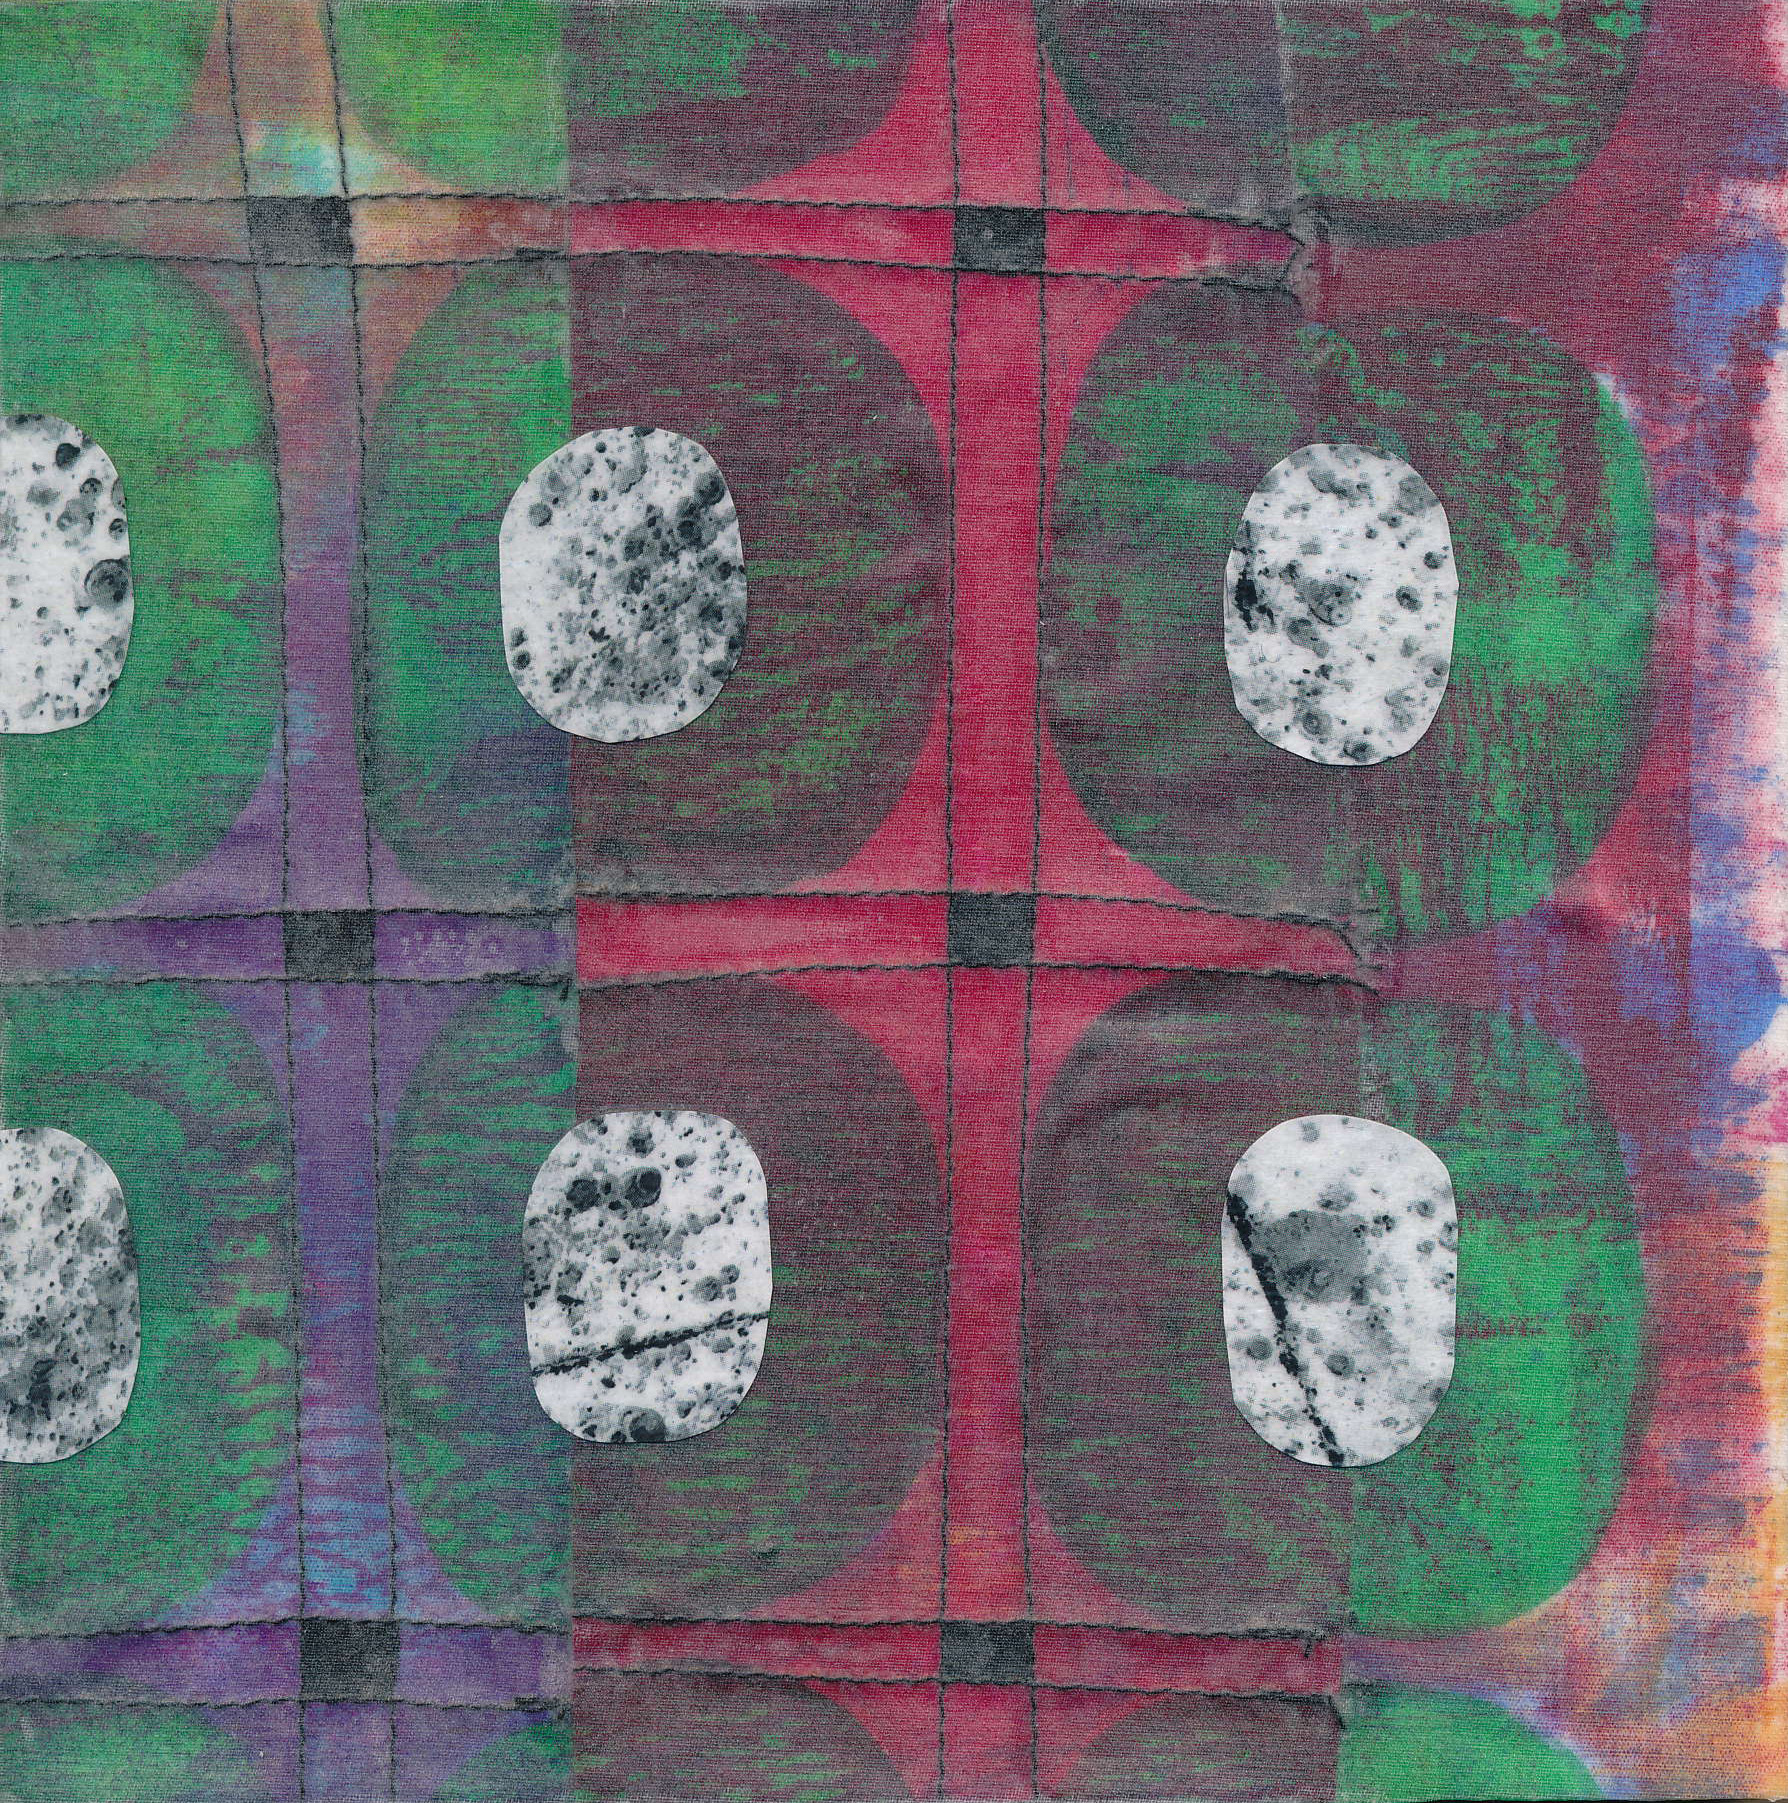  Jeanne Williamson,  Fragments from Ice on Fences #14 , mixed media on board, 6x6 